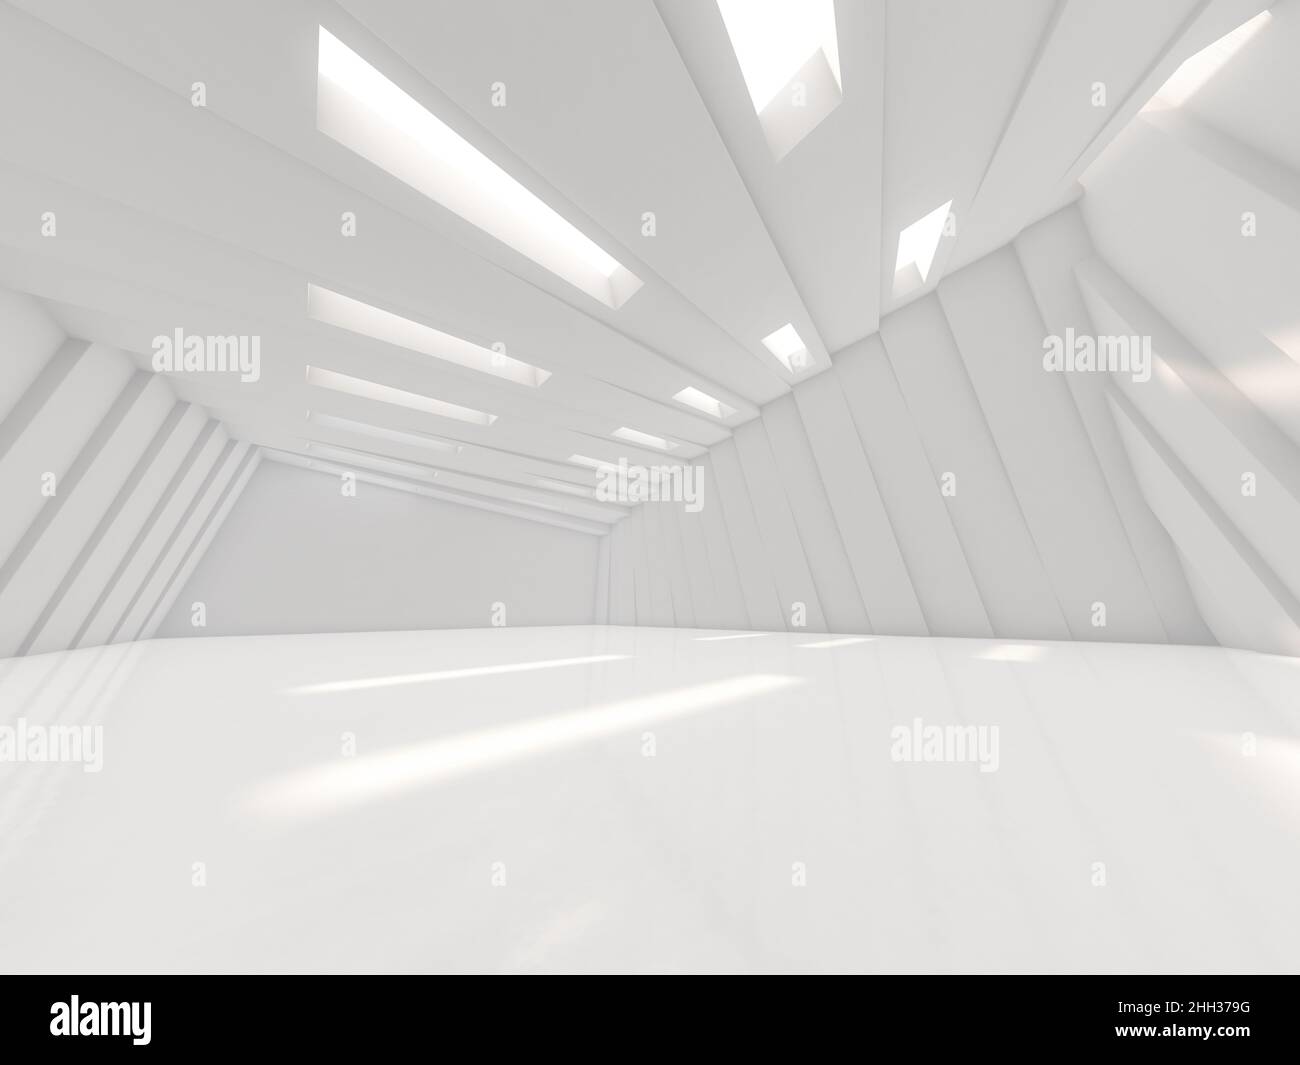 Abstract modern architecture background, empty open space interior. 3D rendering Stock Photo